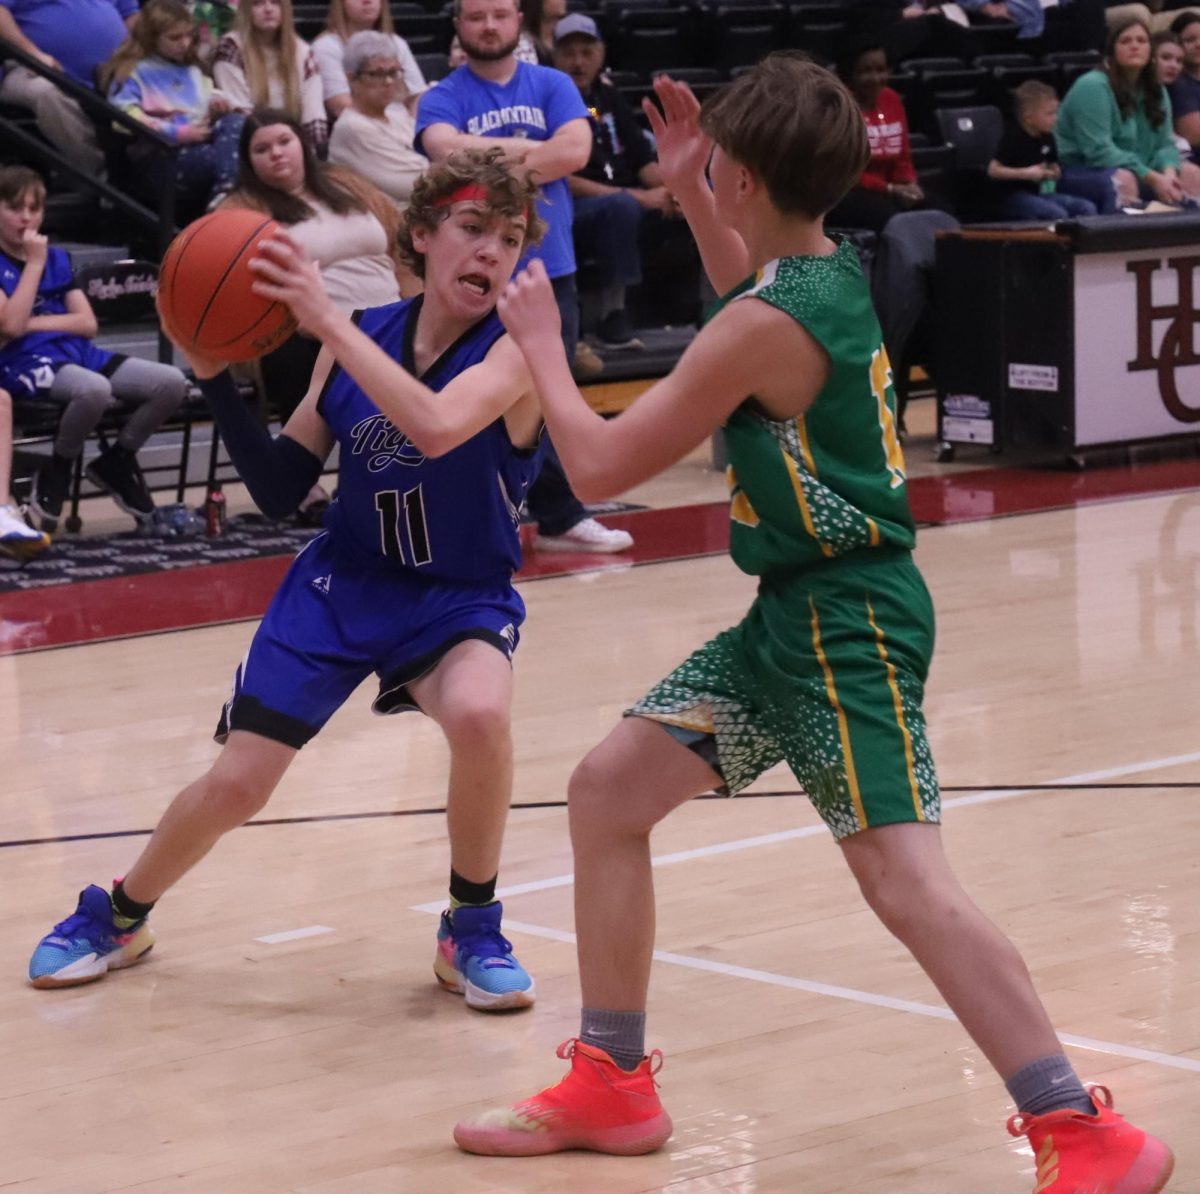 Black Mountain guard Evan Jones worked against a Green Hills defender in action from the Black Bears Panorama on Saturday at Harlan County High School.